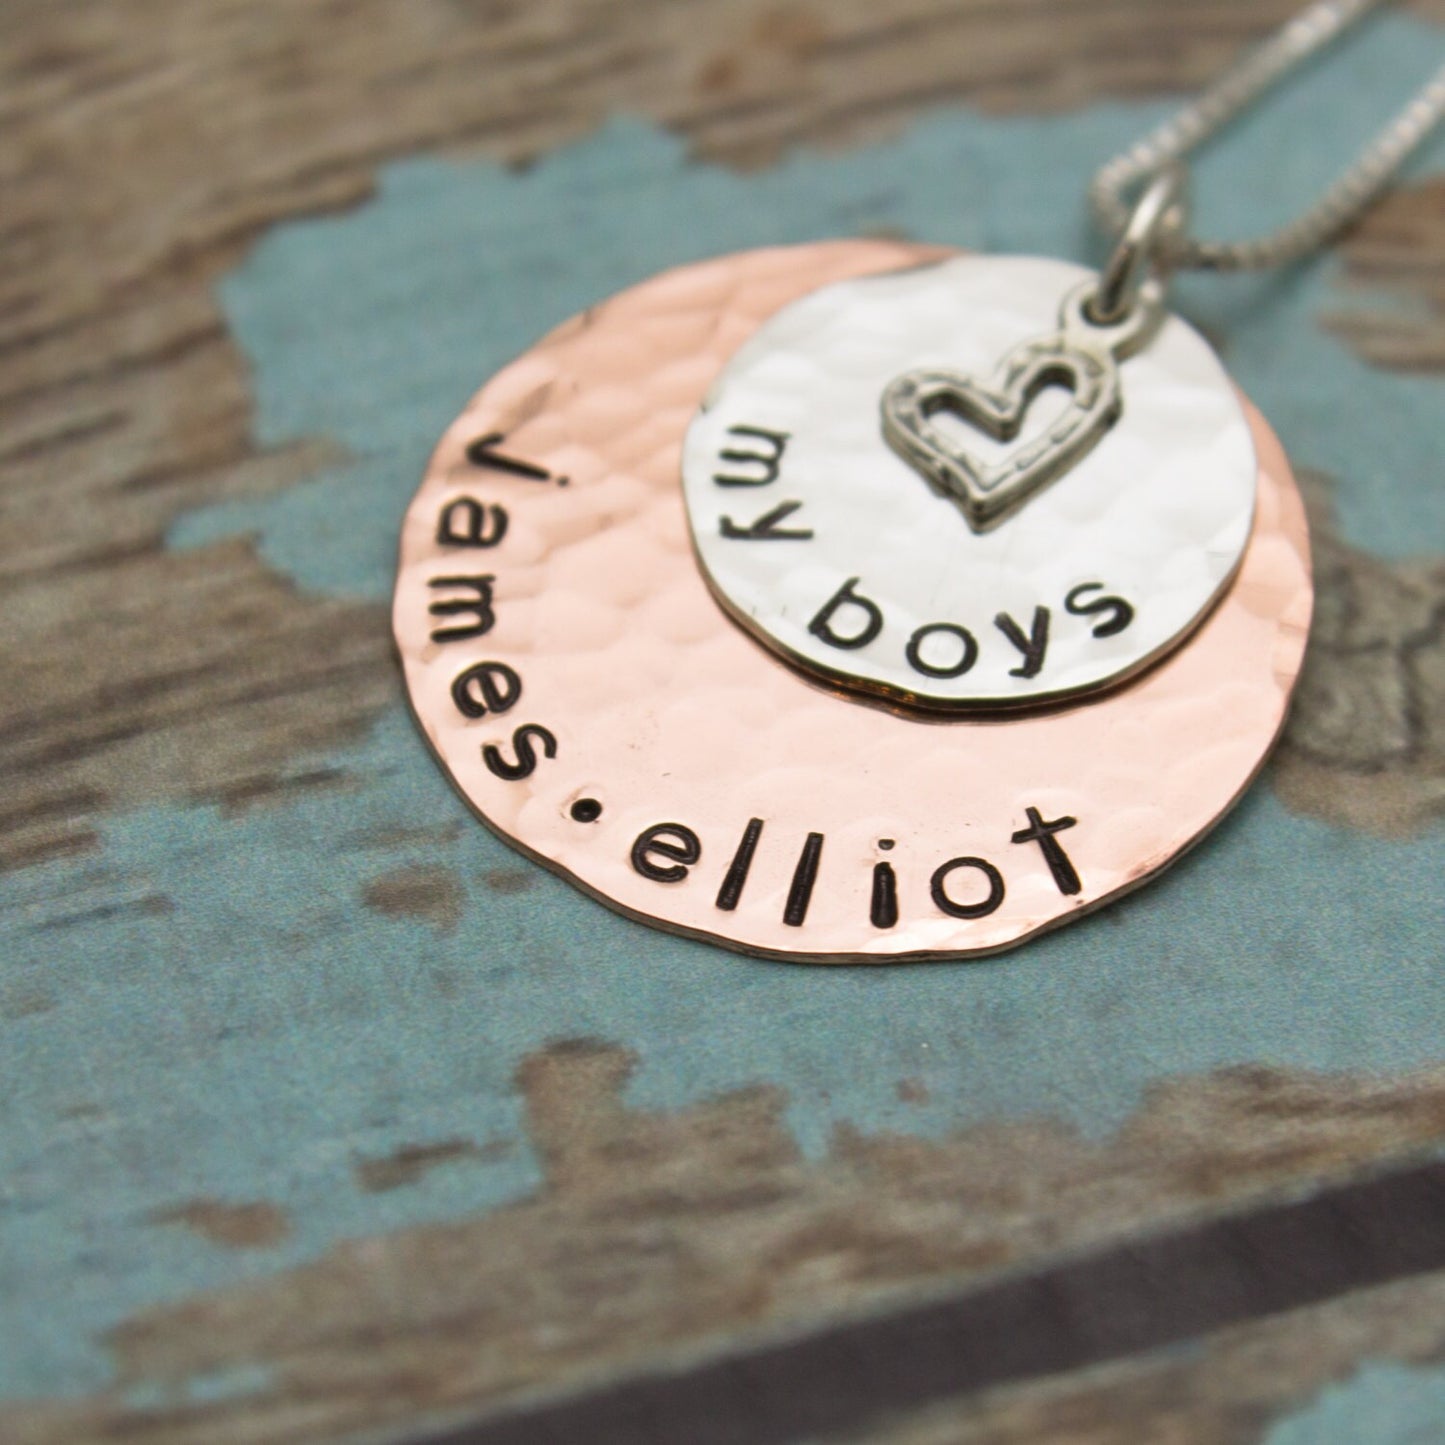 Personalized Mom Necklace, My Boys My Girls Silver and Copper Mommy Mother Grandmother Personalized Necklace Hand Stamped Jewelry